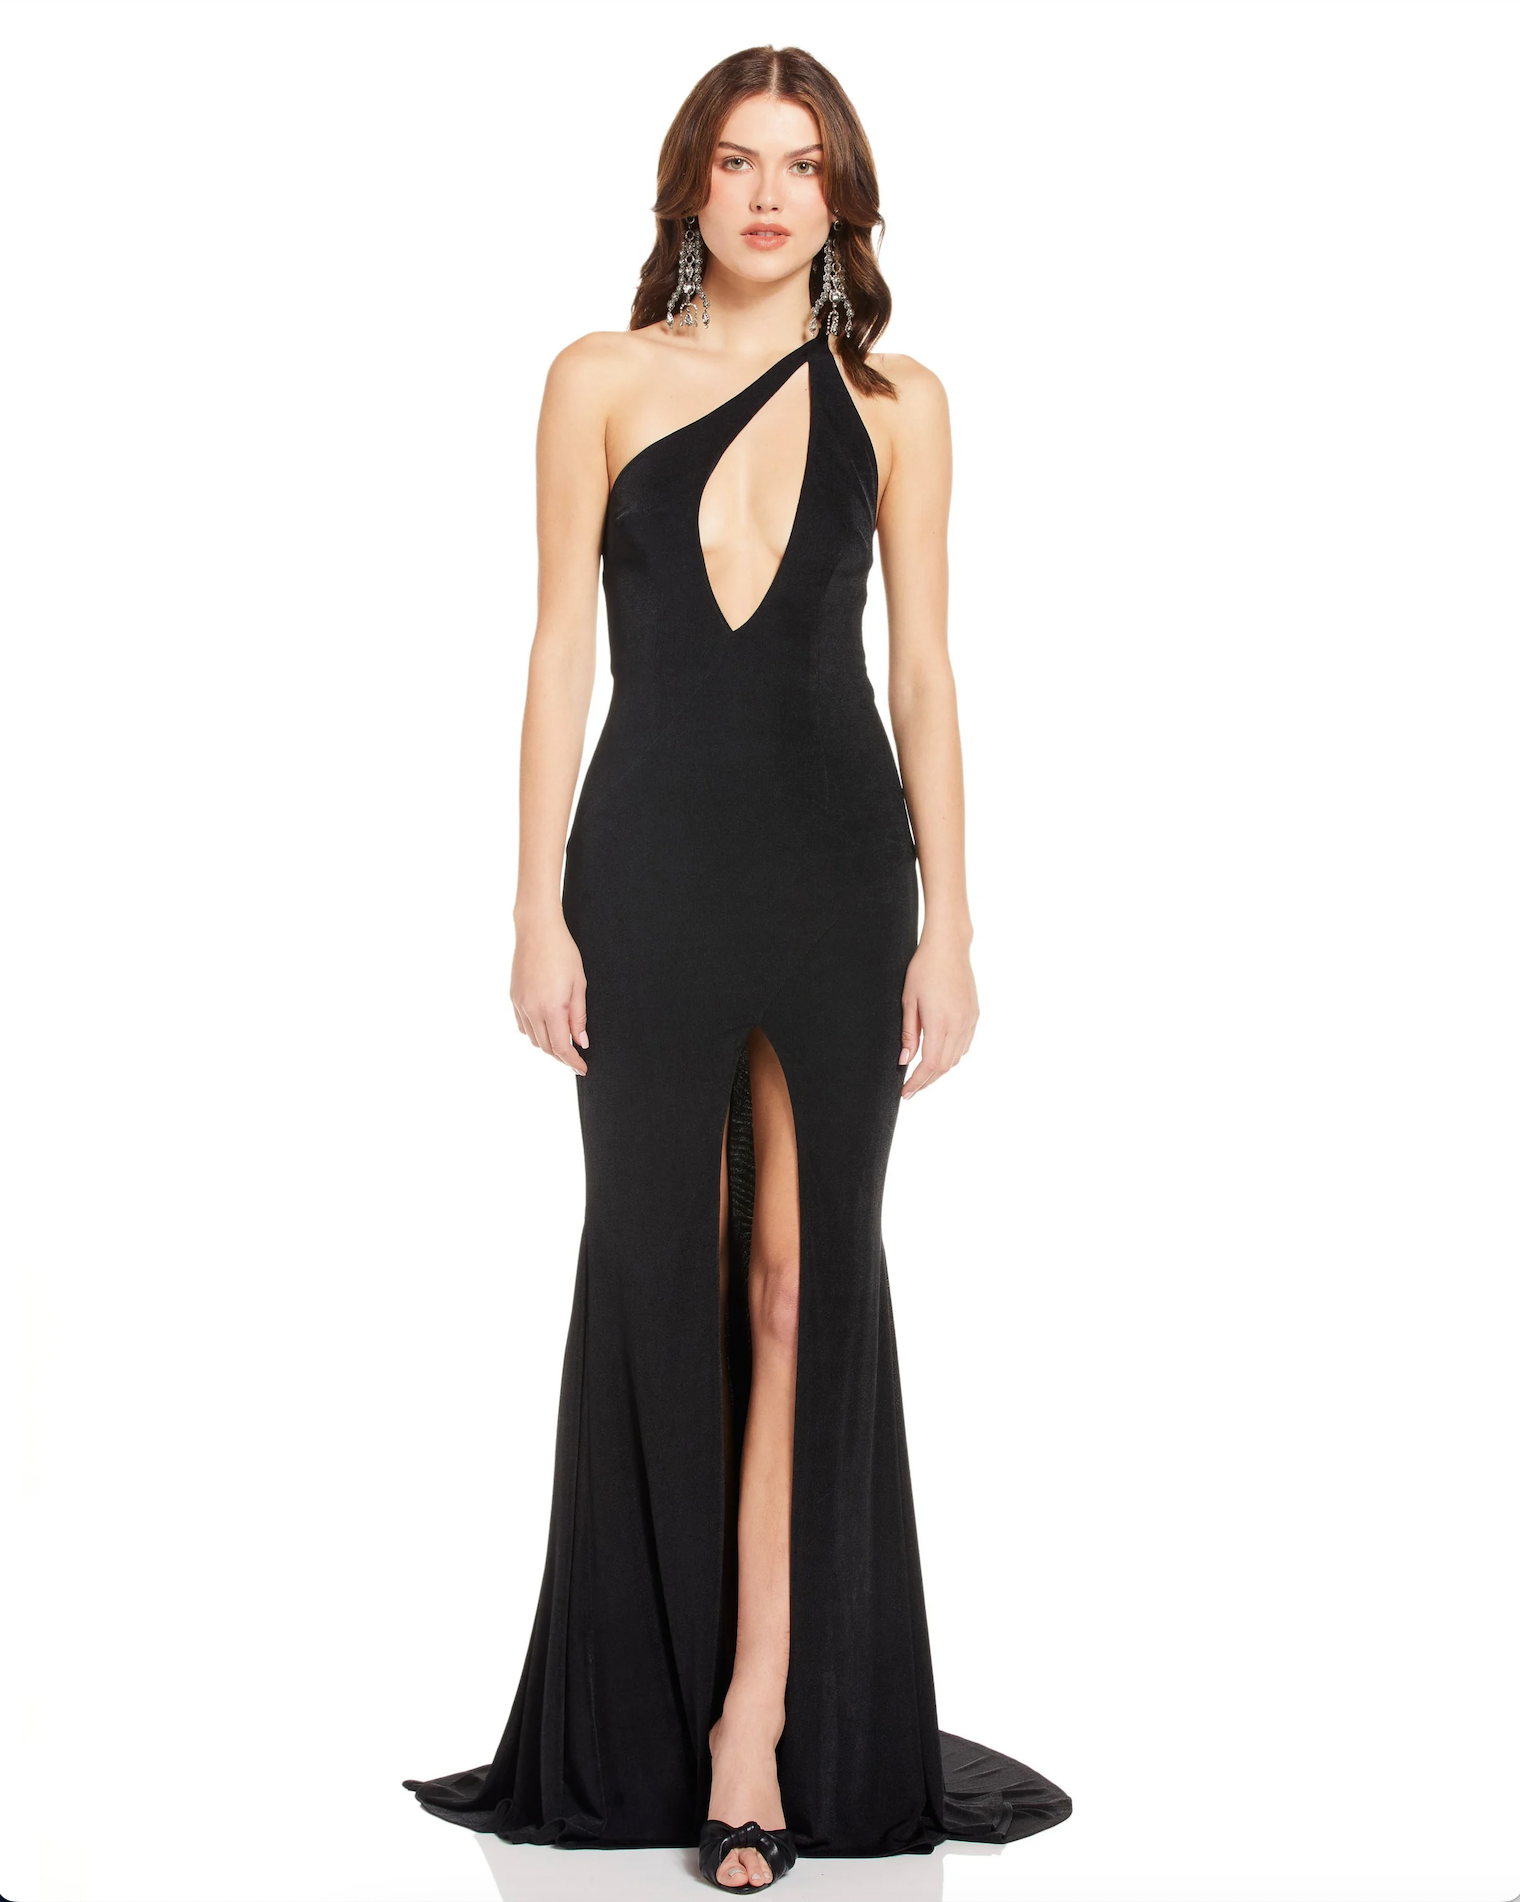 KATIE MAY KATIE MAY ISABELLA 1SHLDR CUT-OUT GOWN/DRESSES